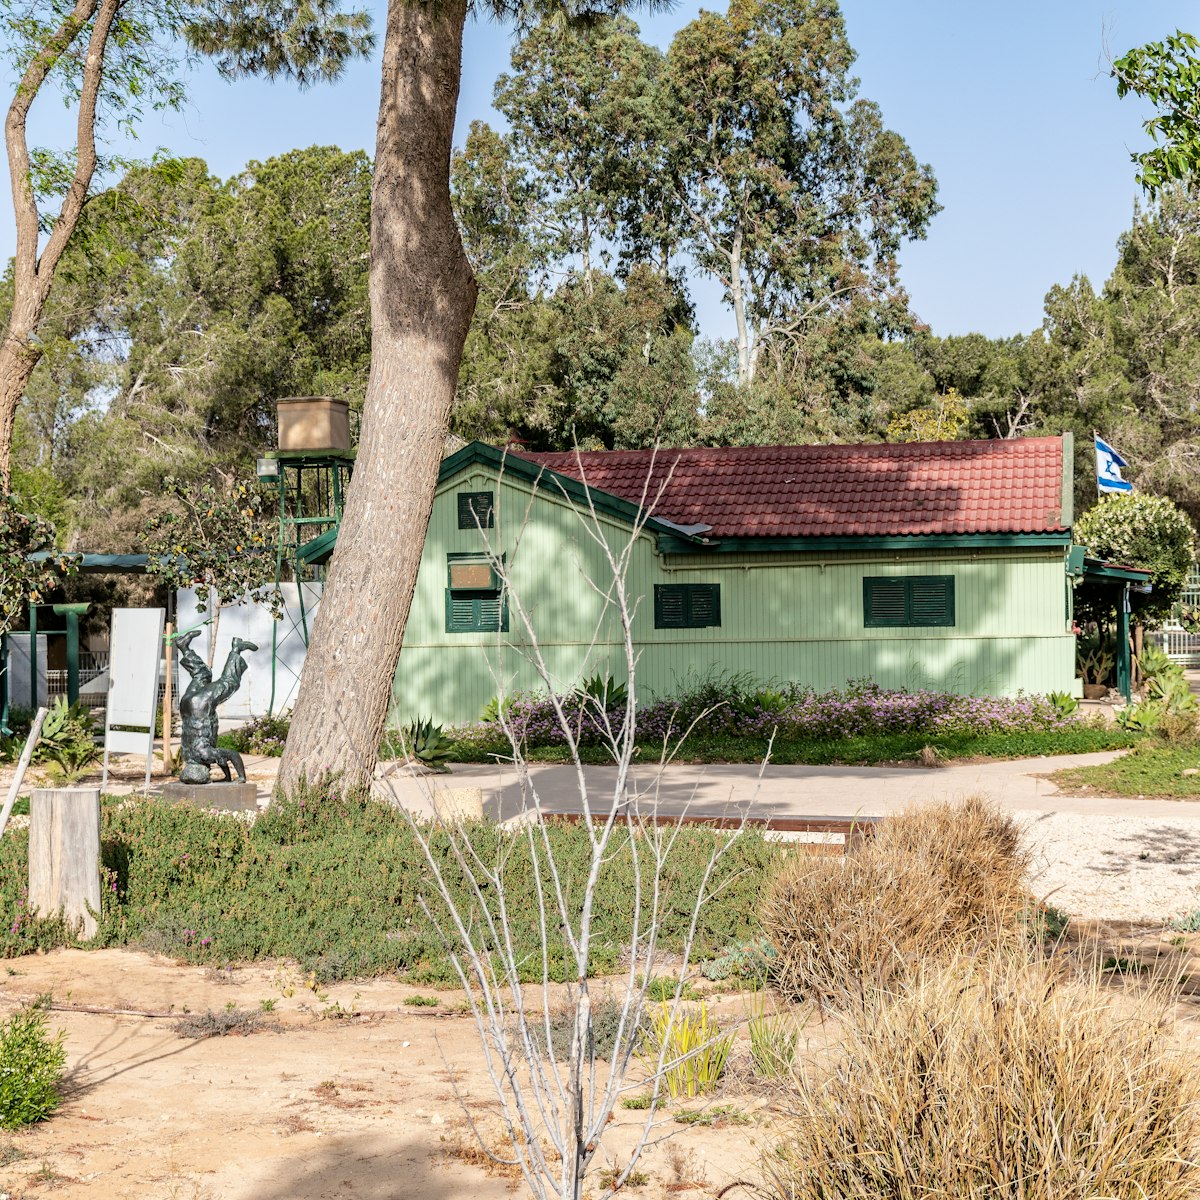 The apartment house of the founder of the State of Israel, Ben-Gurion, in the Kibbutz Sde Boker in the Judean Desert.